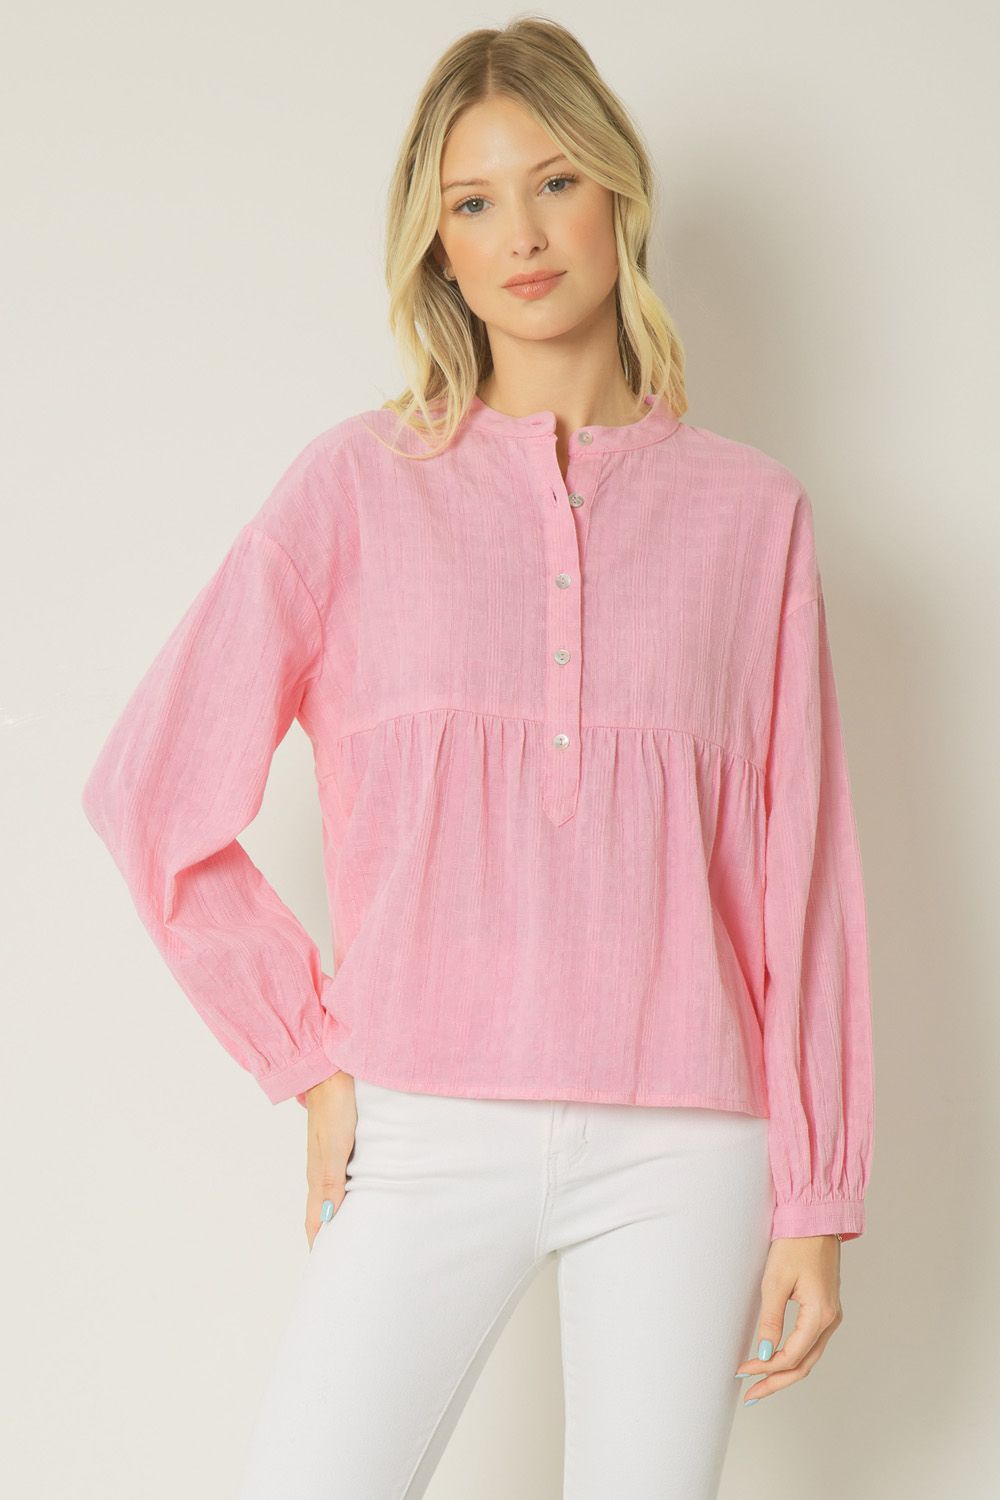 The Shelby Blouse in Pink